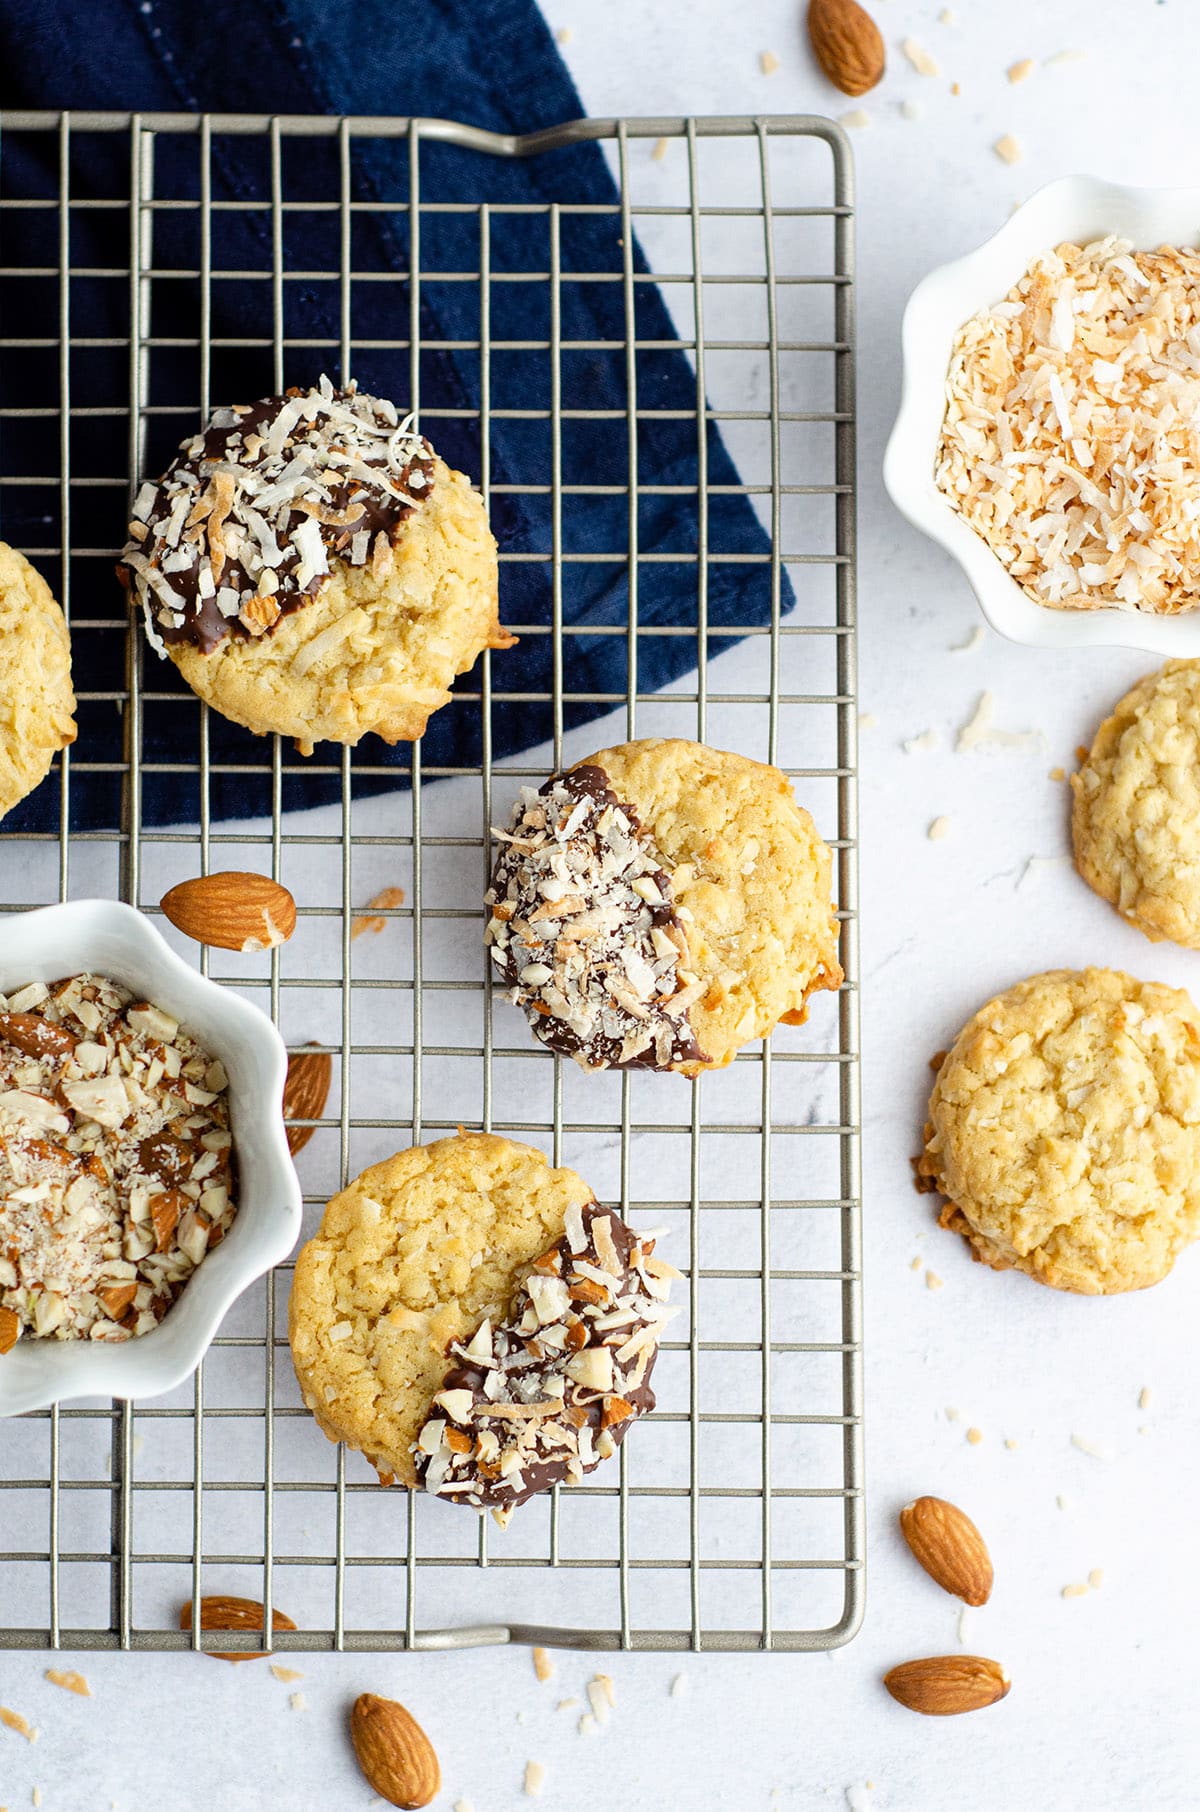 Easy coconut drop cookies, dipped in chocolate and sprinkled with toasted coconut and chopped almonds. via @frshaprilflours